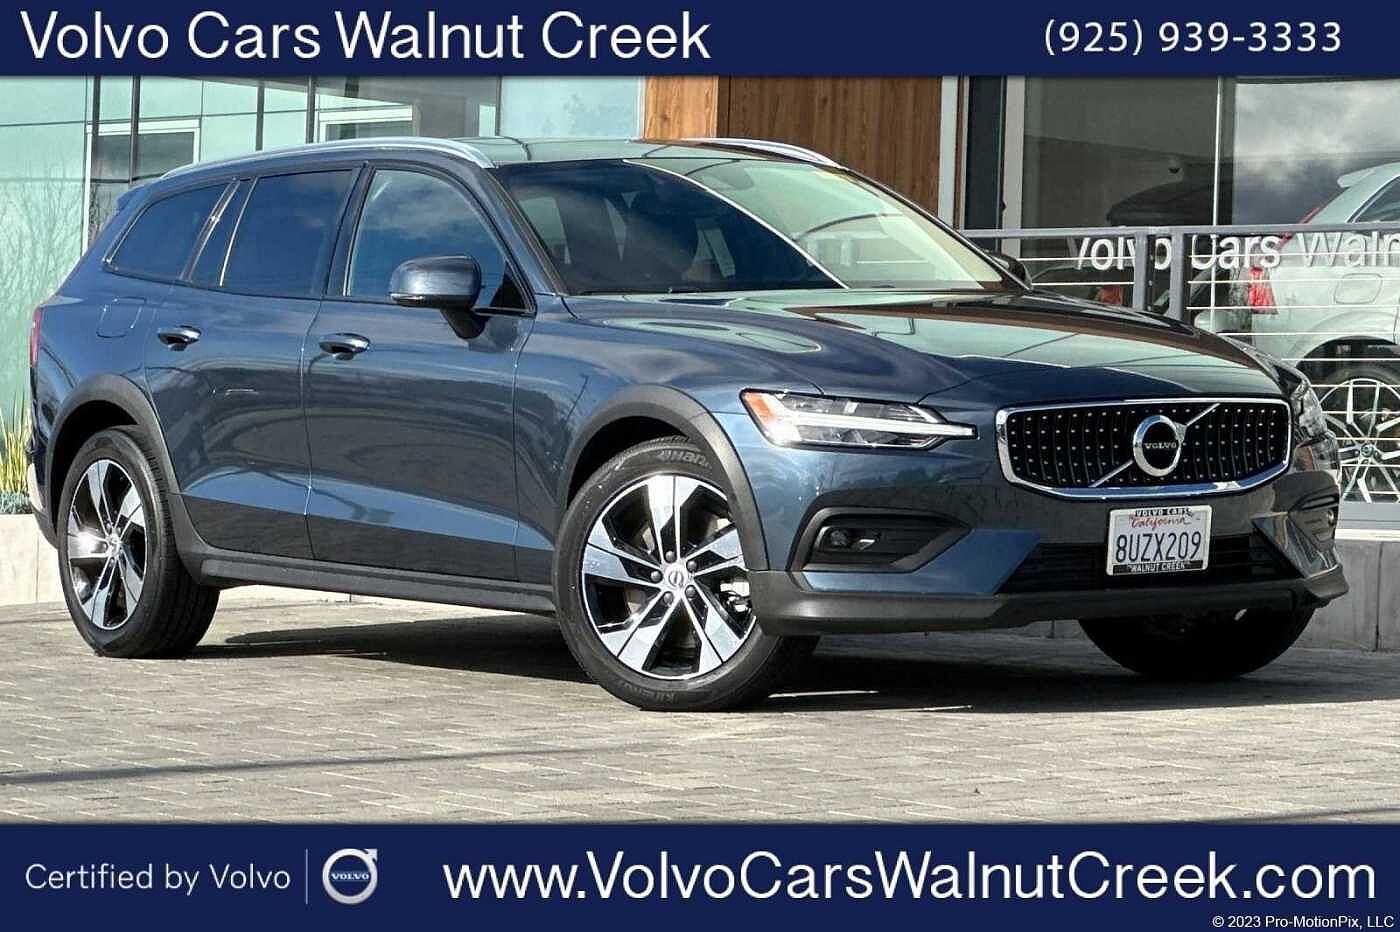 Pre-owned Volvo V60 Cars for Sale on Certified by Volvo | Volvo 